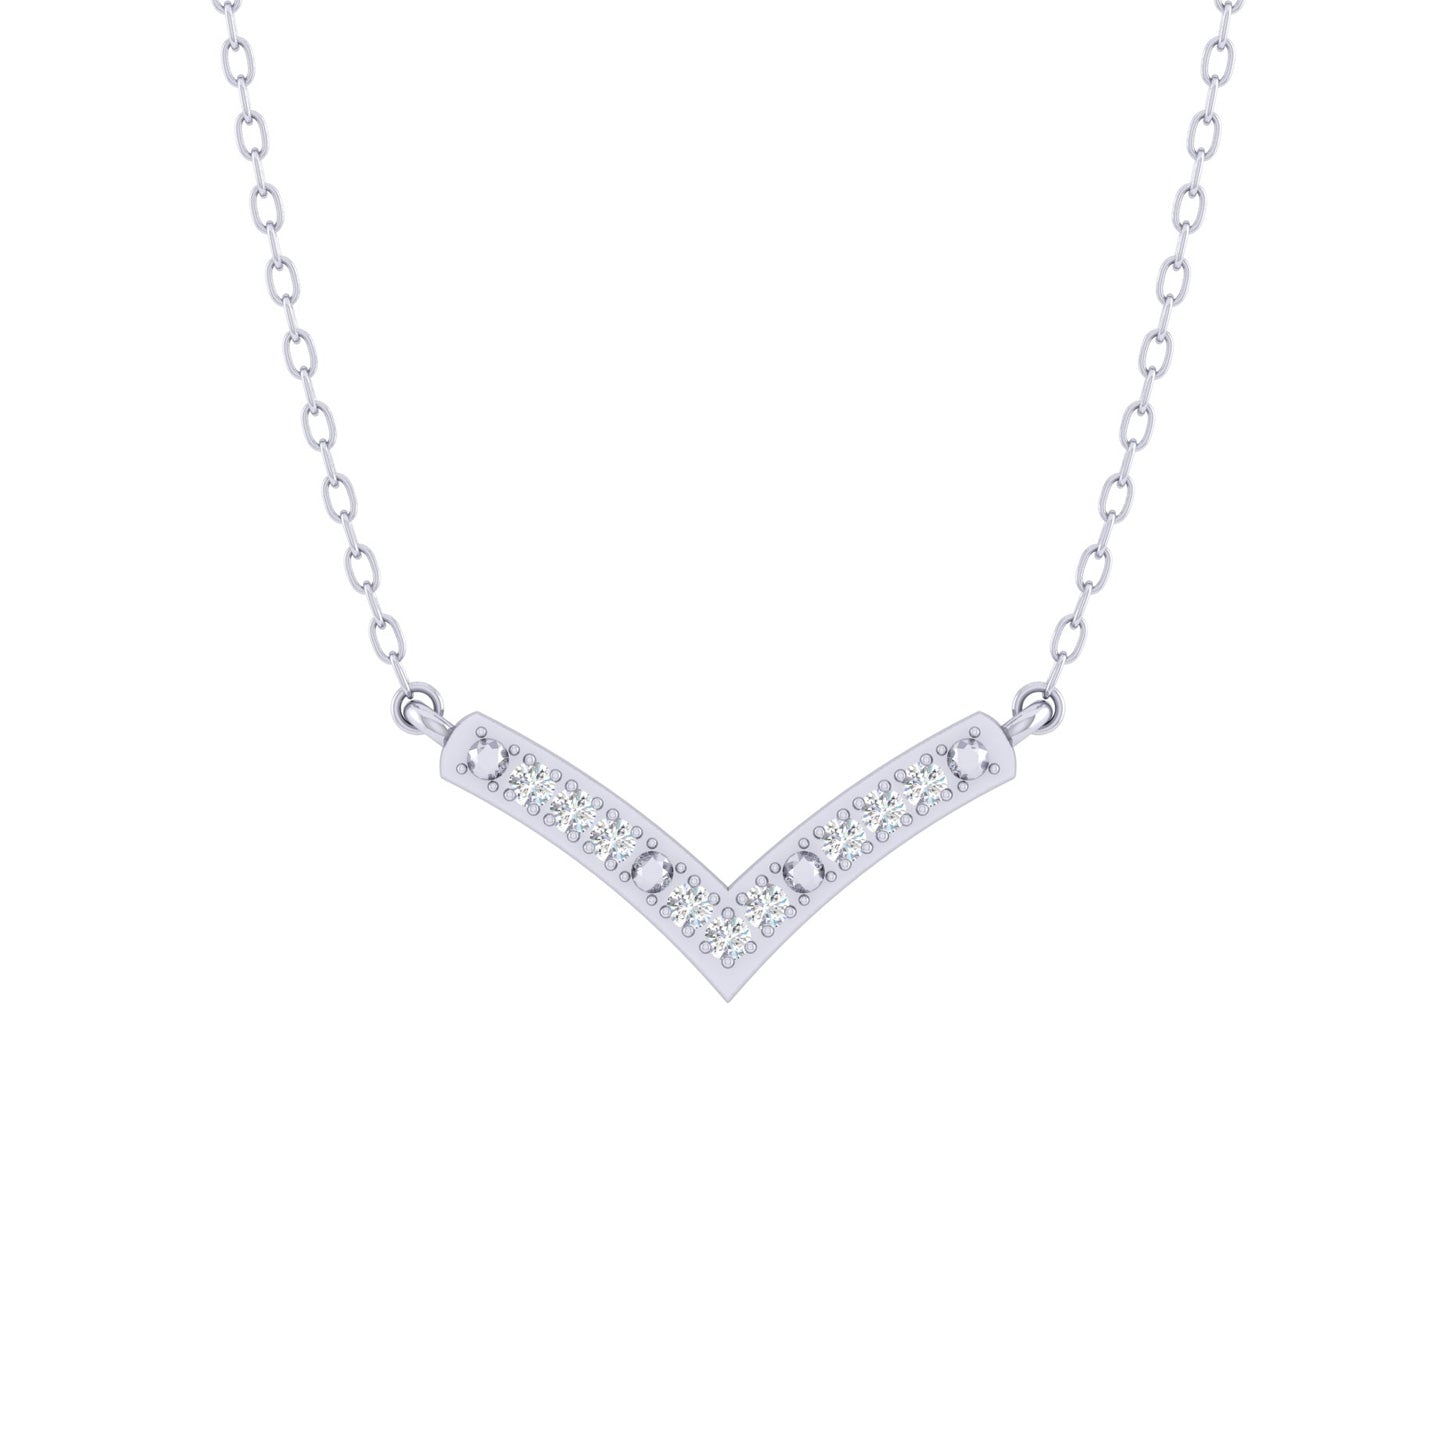 Chevron 1/20 Cttw Natural Diamond Pendant Necklace set in 925 Sterling Silver jewelry gift